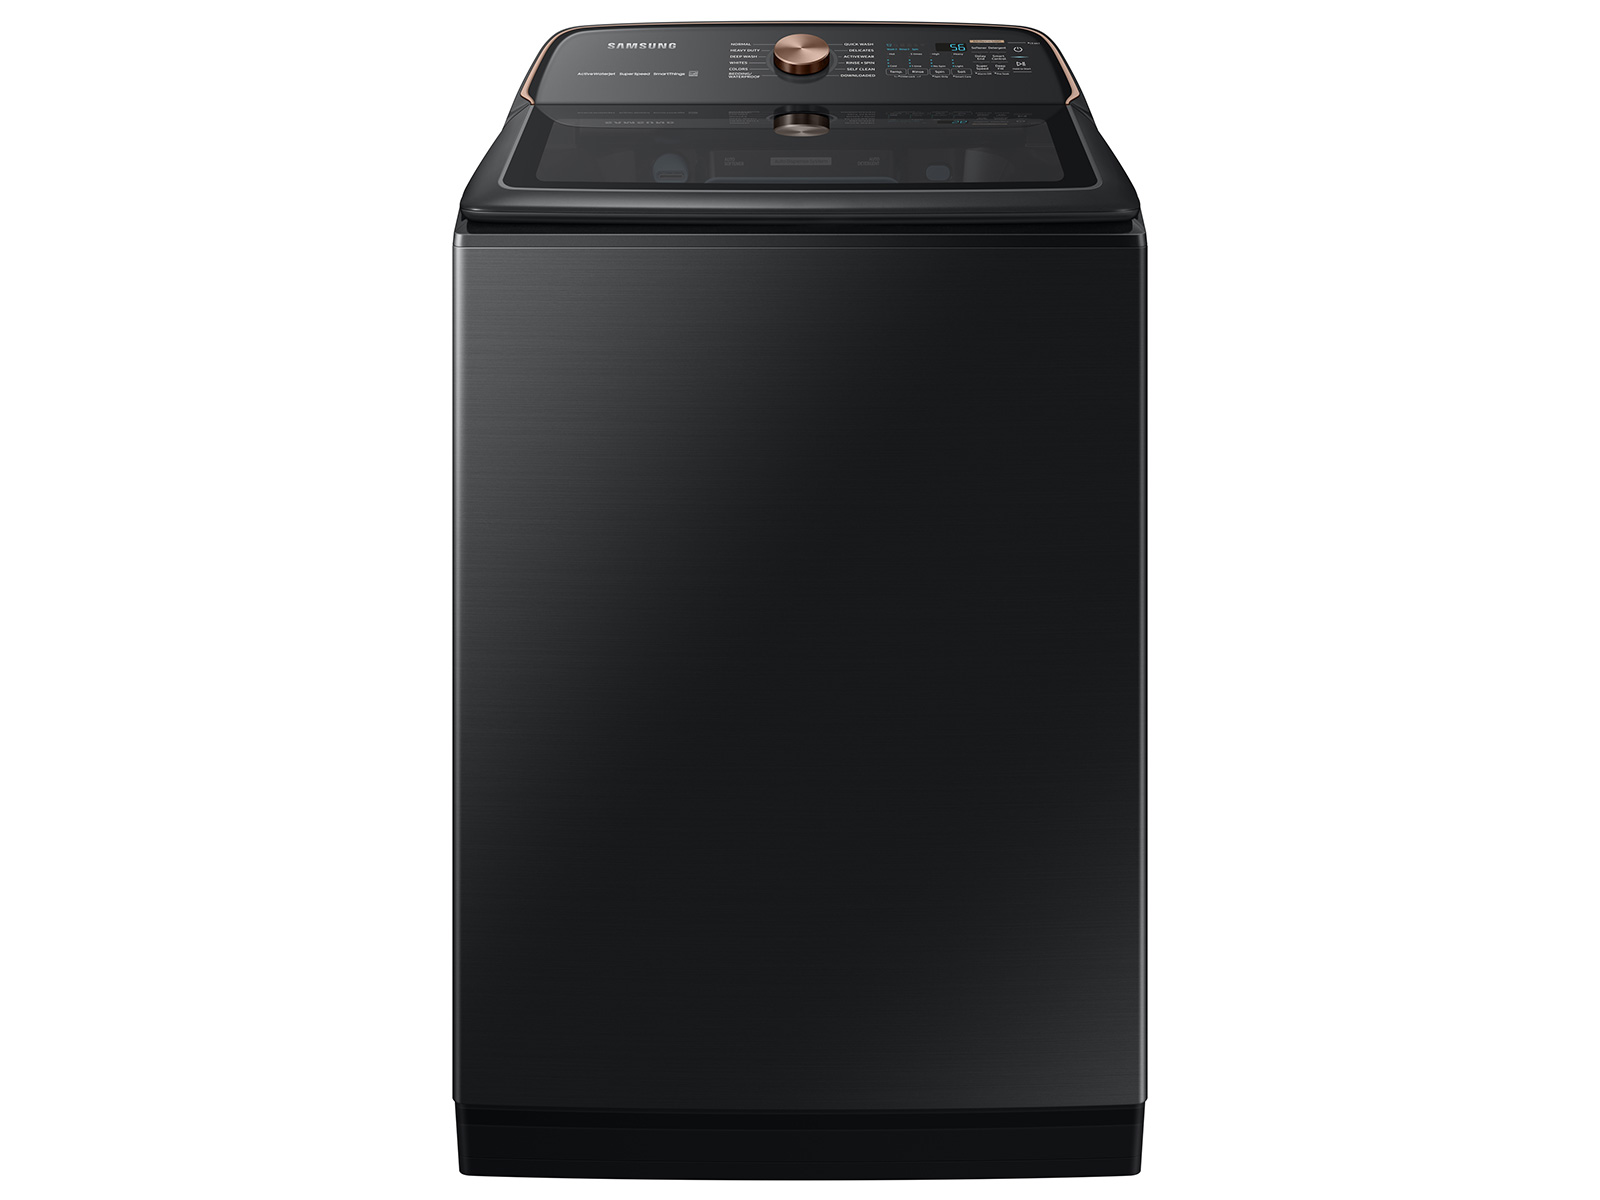 Samsung 5.5 cu. ft. Extra-Large Capacity Smart Top Load Washer with Auto Dispense System in Brushed Black(WA55A7700AV/US)